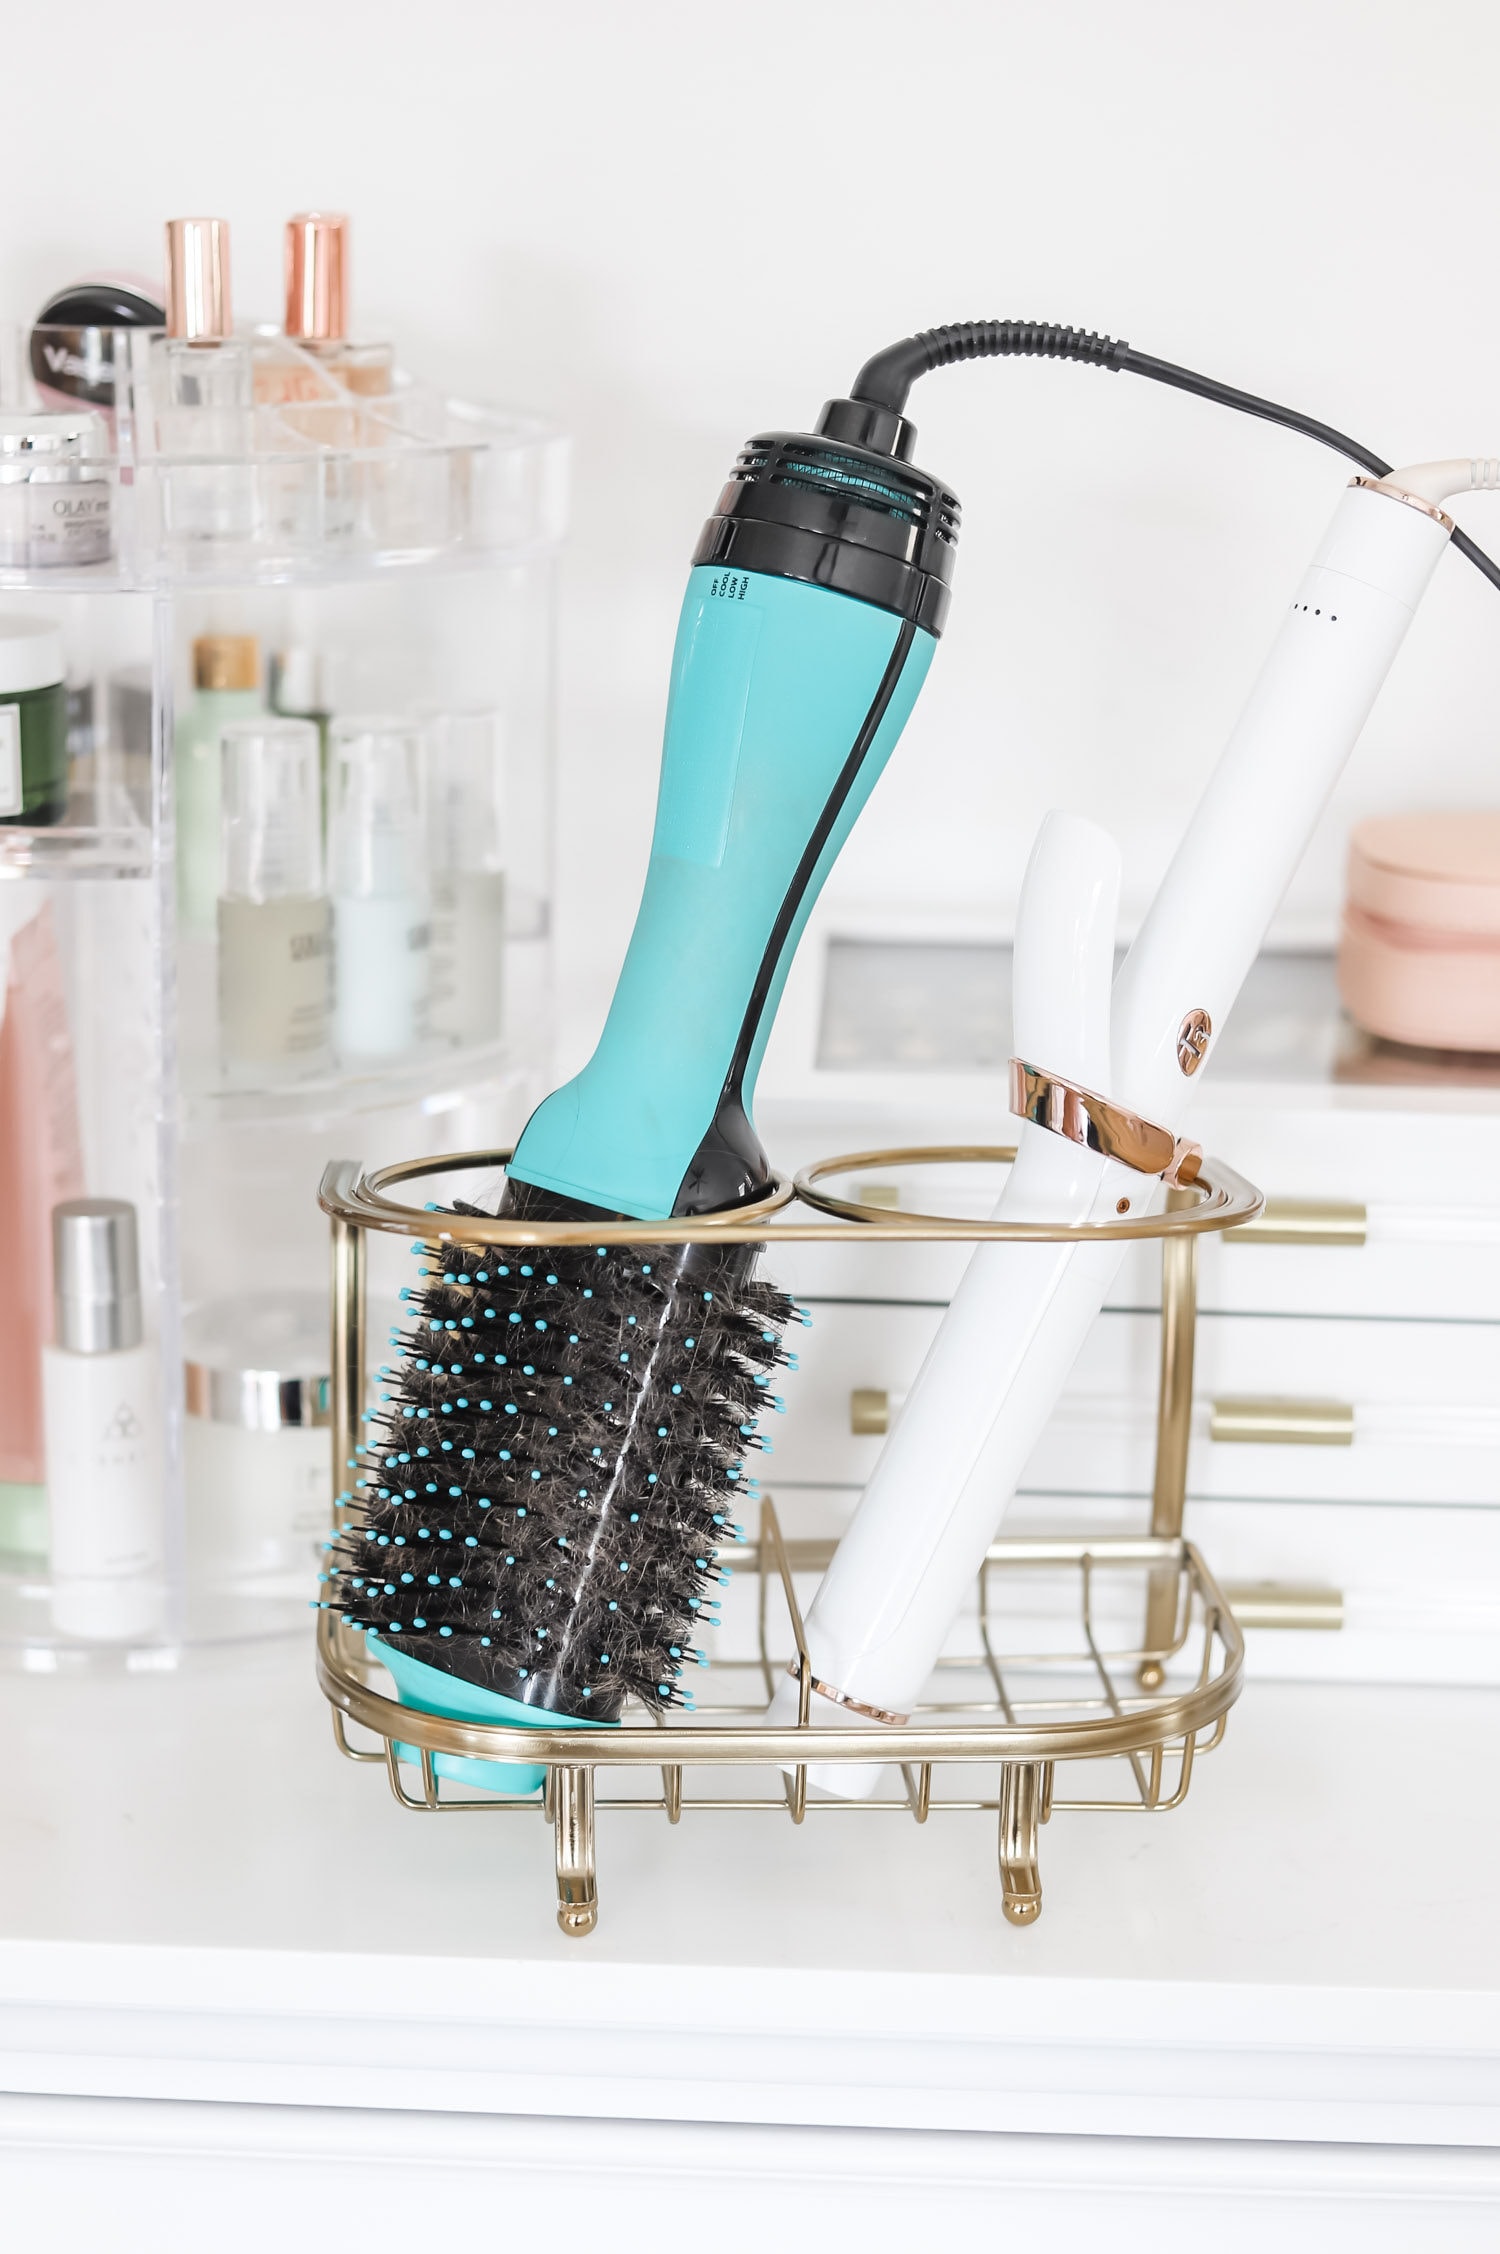 What to Buy On Amazon: the top beauty and fashion bestsellers from Amazon Prime - including the best gold hot tool holder for your vanity under $20, and the BEST hair tool of all time - the Revlon Volumizer! | Orlando, Florida beauty and fashion blogger Ashley Brooke Nicholas